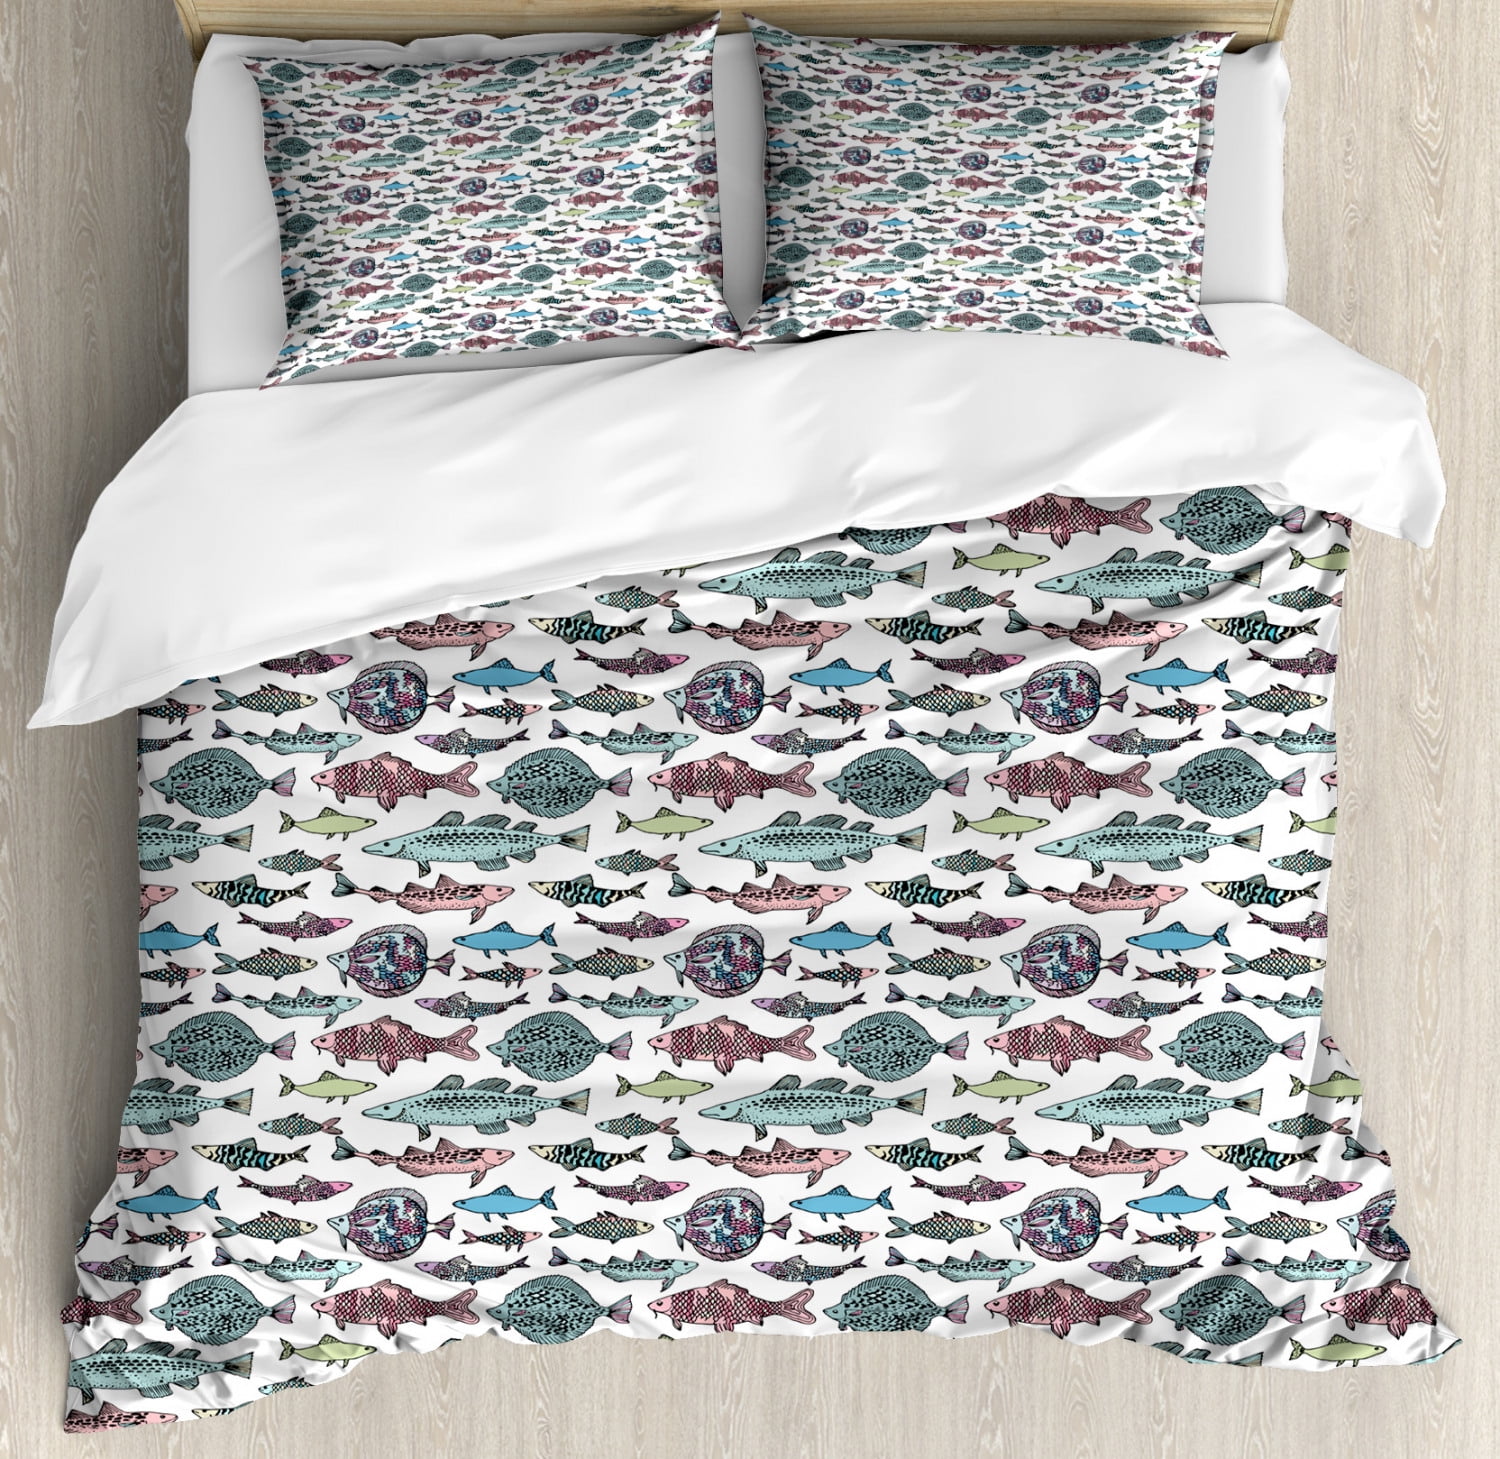 Fish Duvet Cover Set King Size Hand Drawn Fish Pattern With